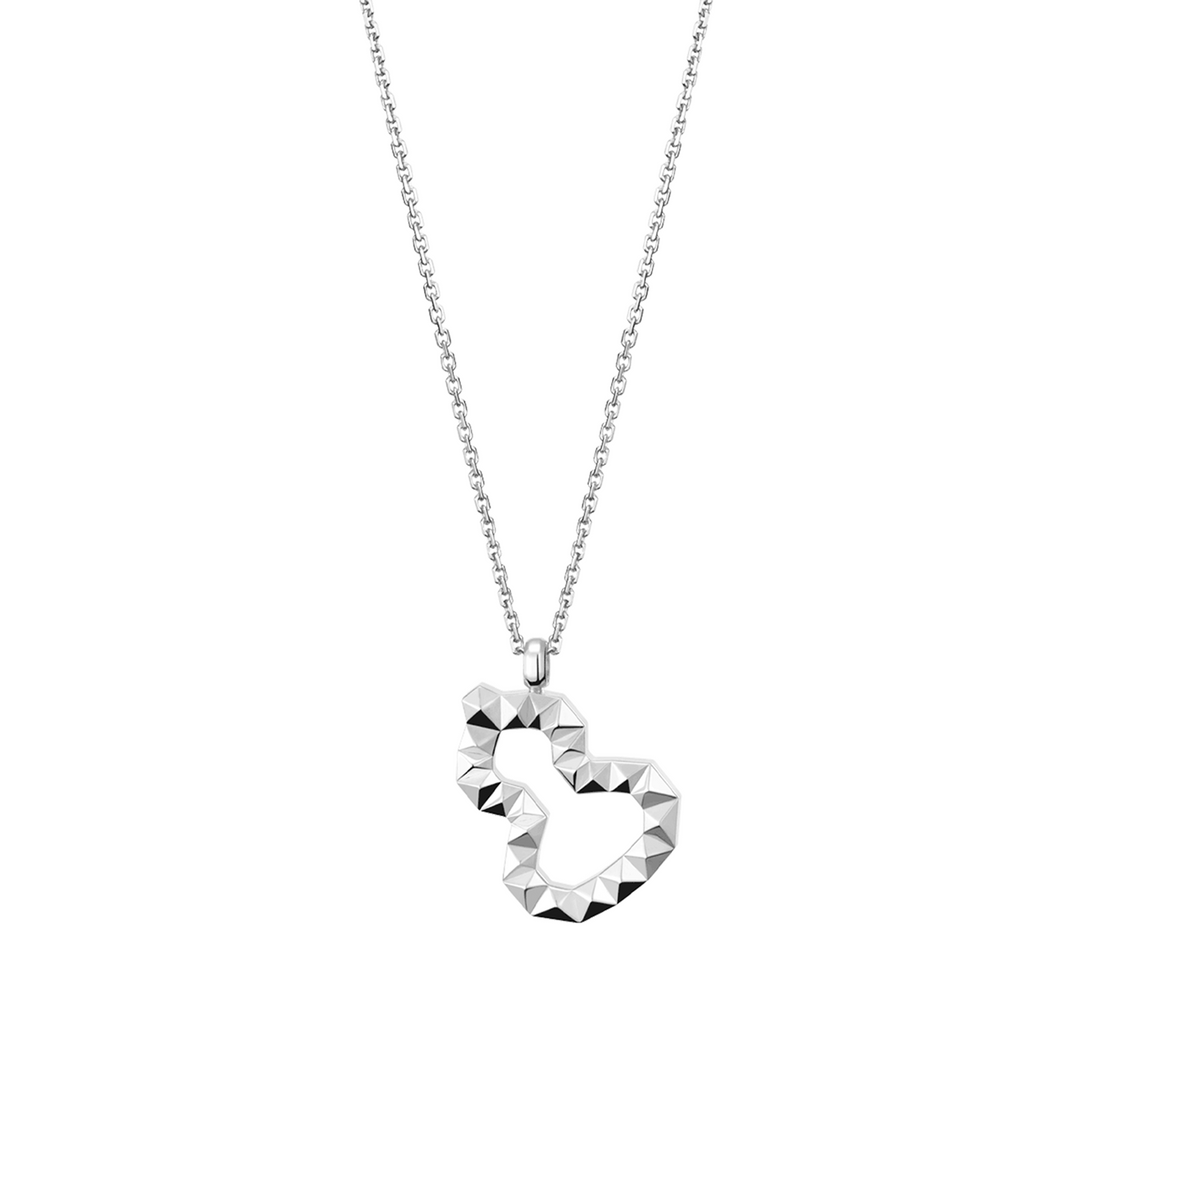 Wulu 18 necklace in 18K white gold